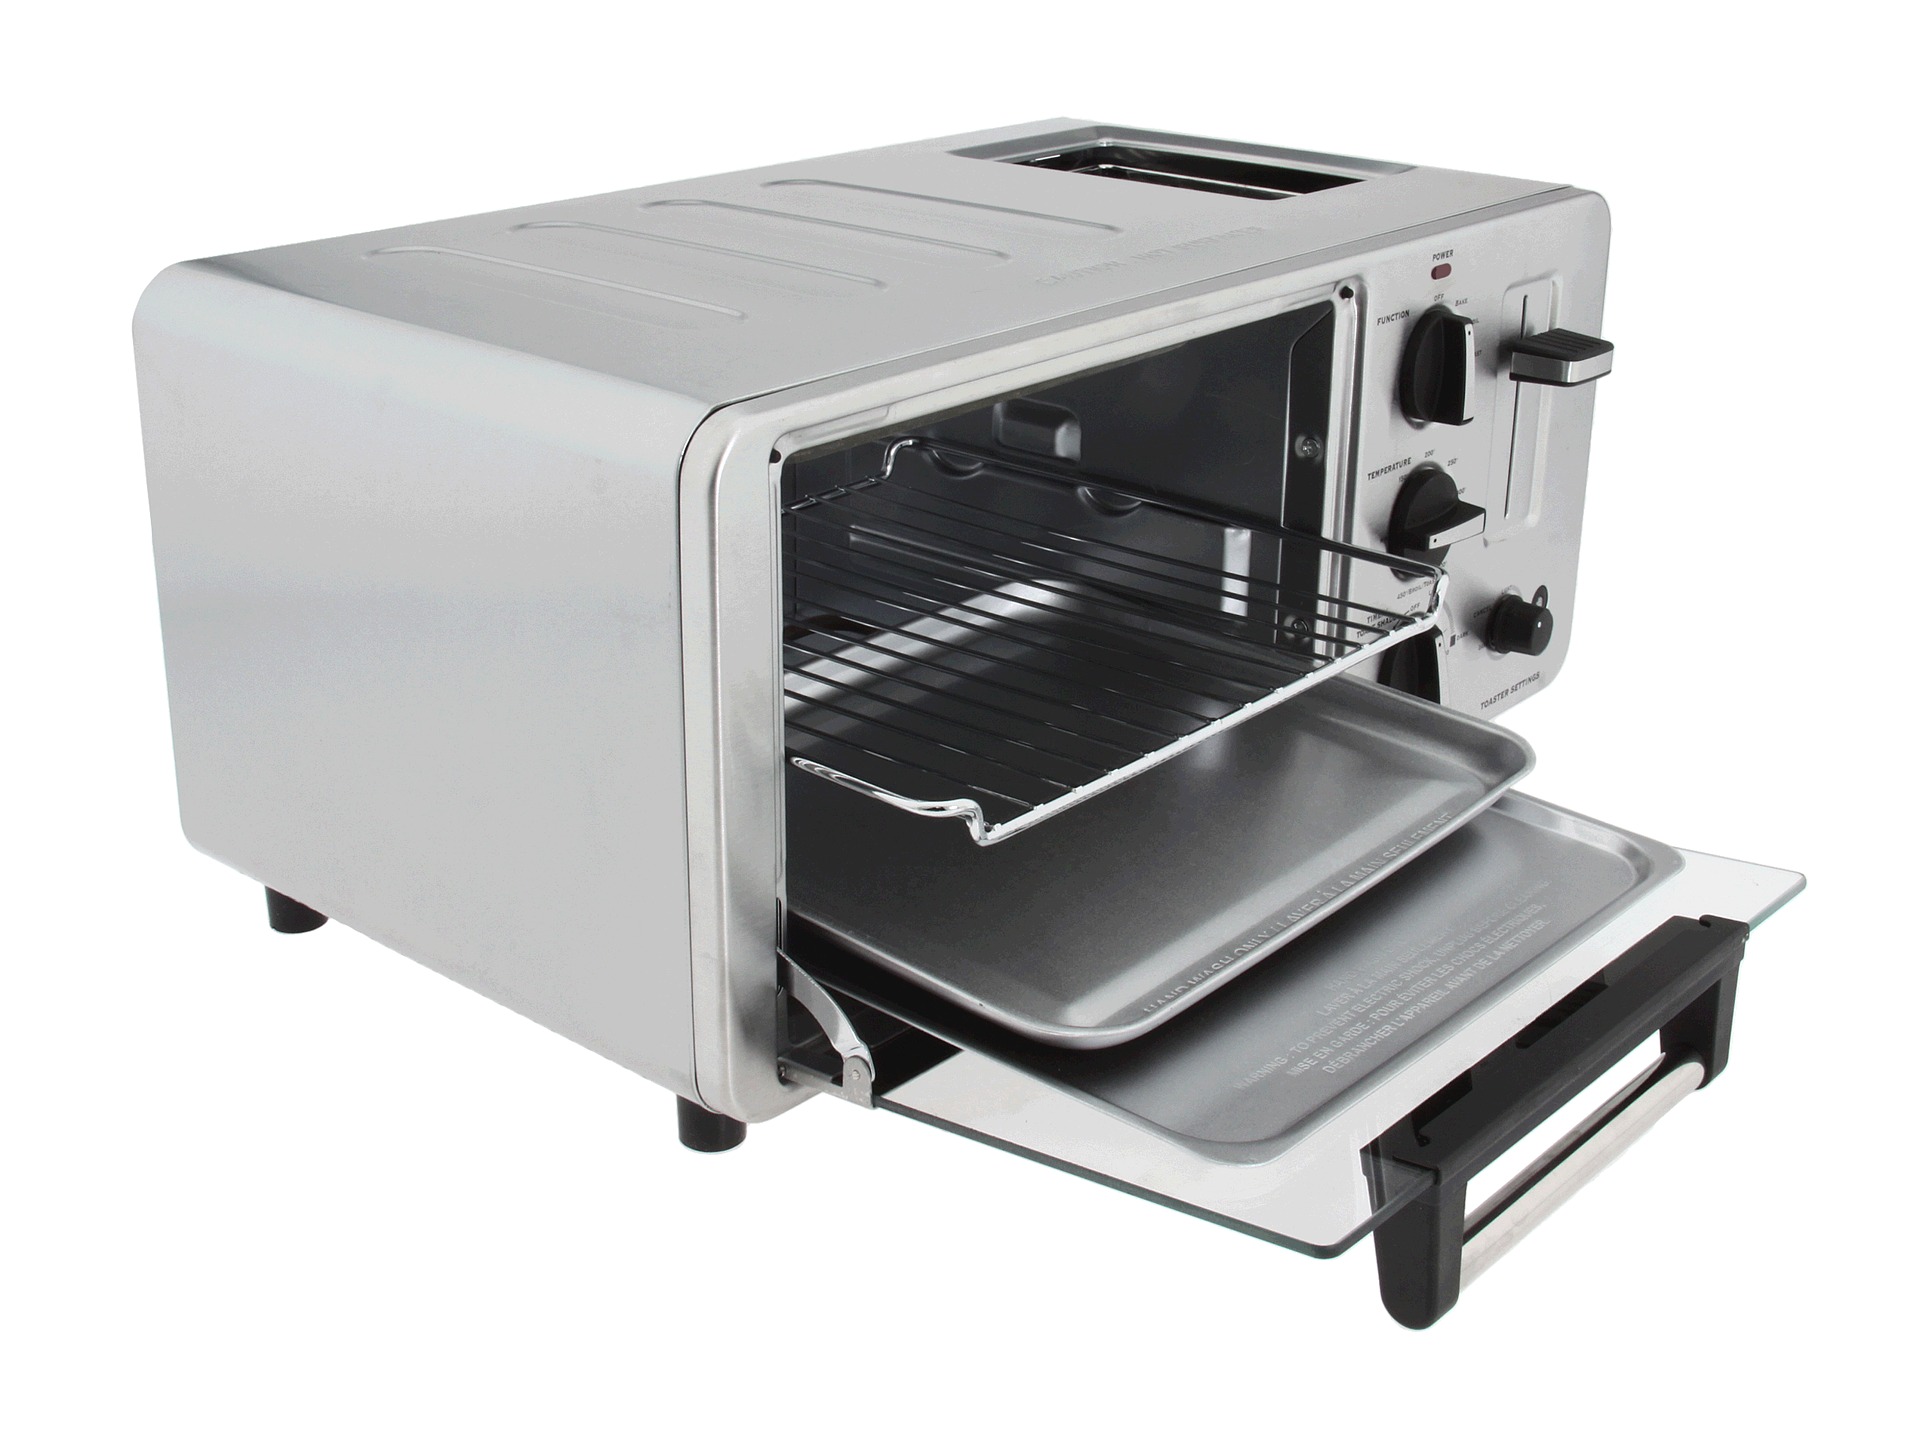 Waring Pro WTO150 Toaster Oven